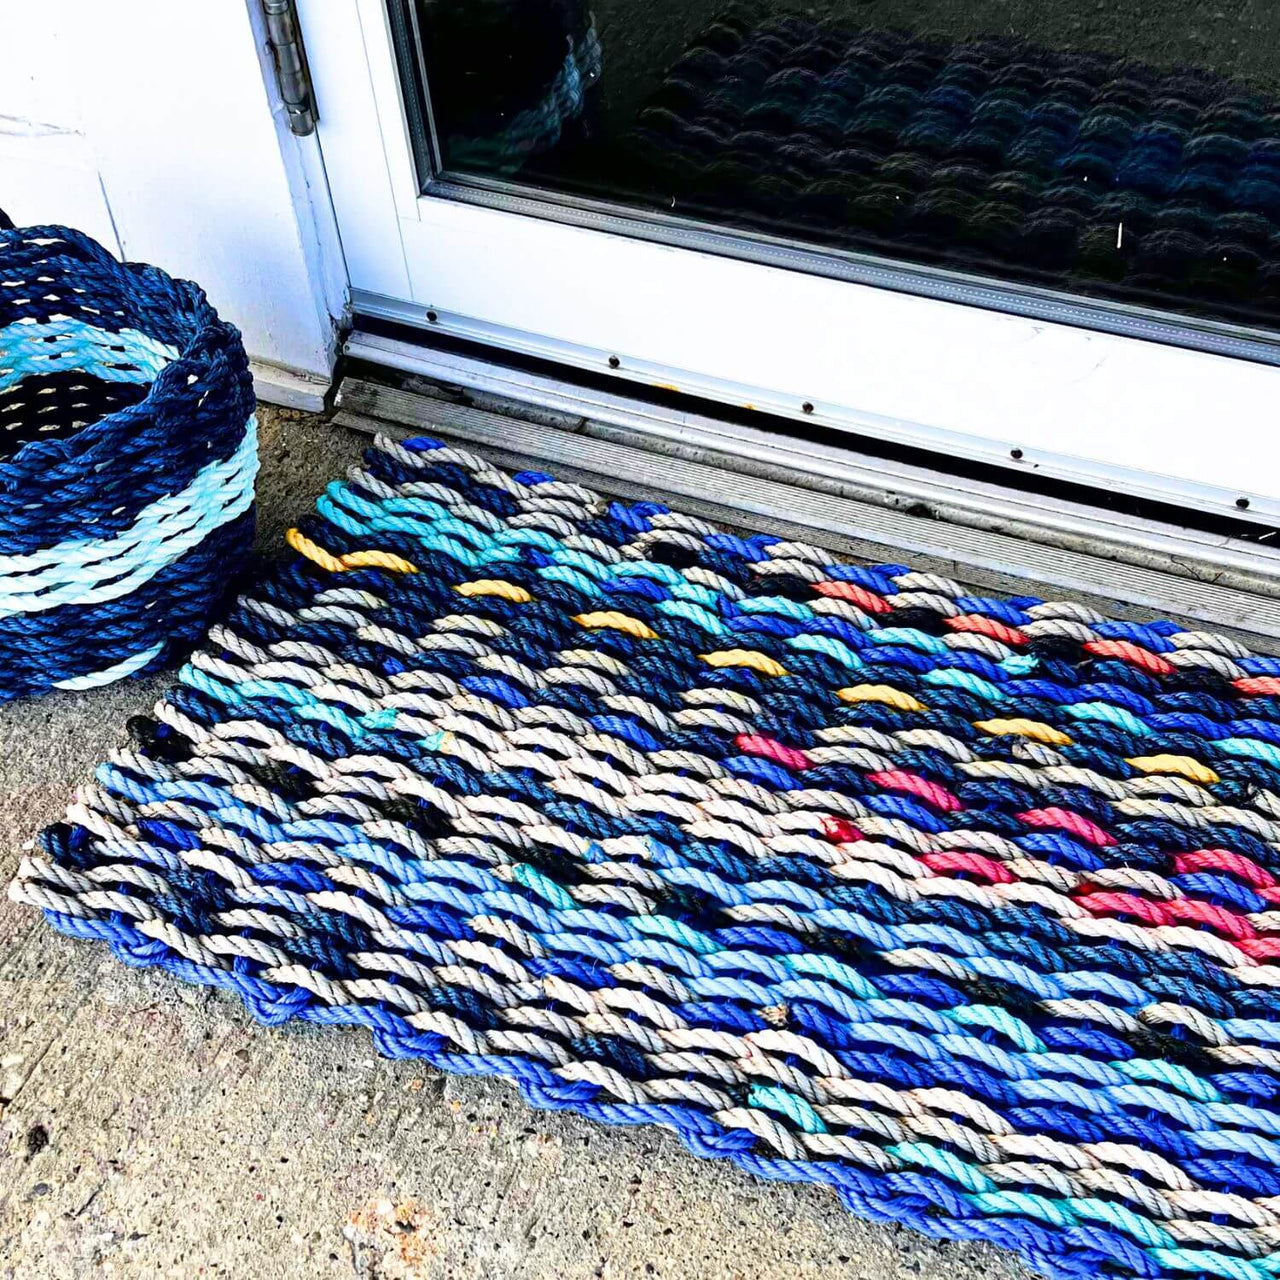 Premium Select Recycled Lobster Rope Doormat, Thin Stripes, 18 x 30, Angled View in Front Door